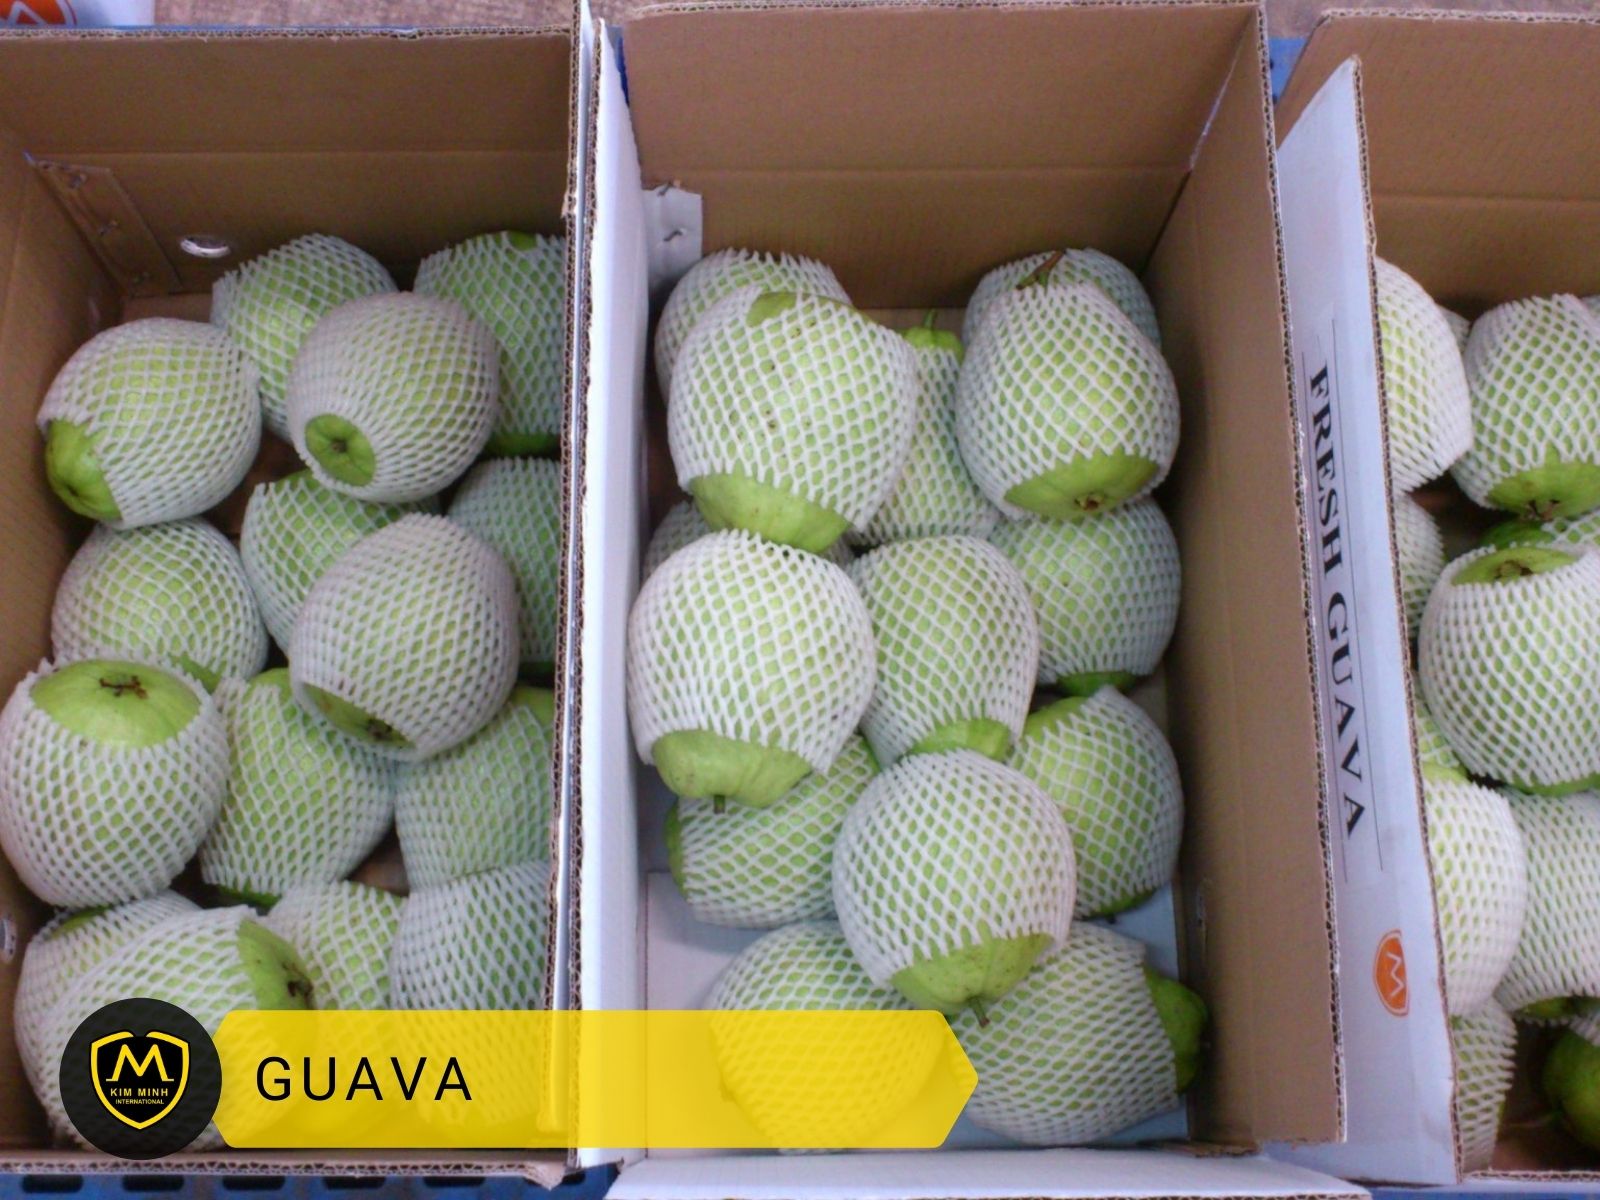 Packing & Loading Guava 01